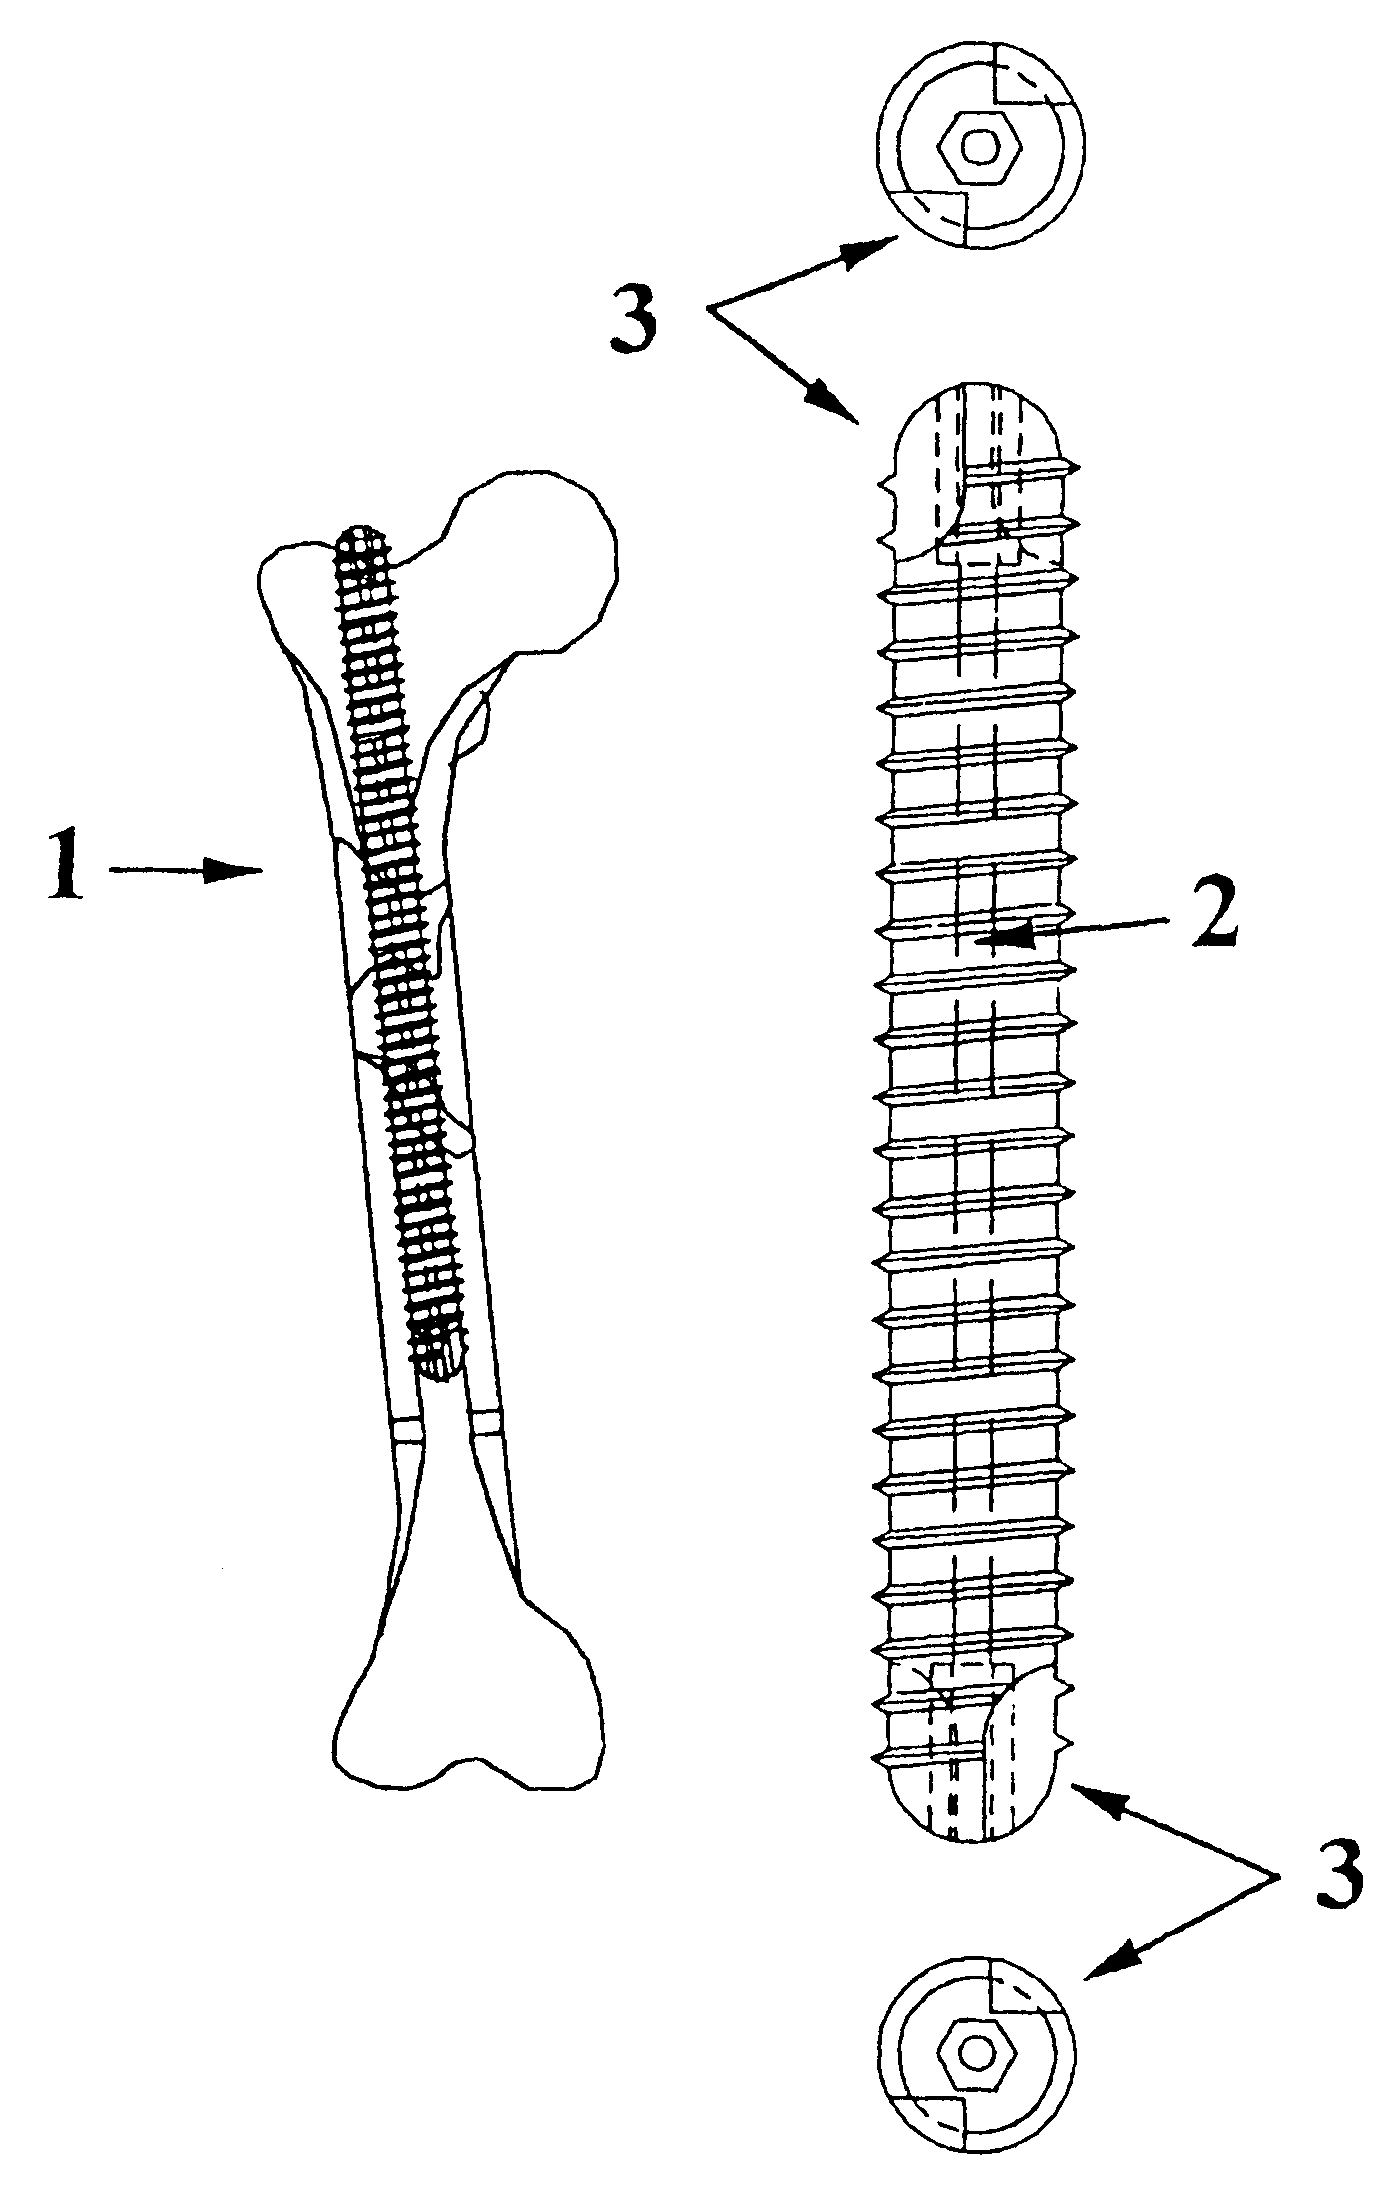 Axial intramedullary screw for the osteosynthesis of long bones